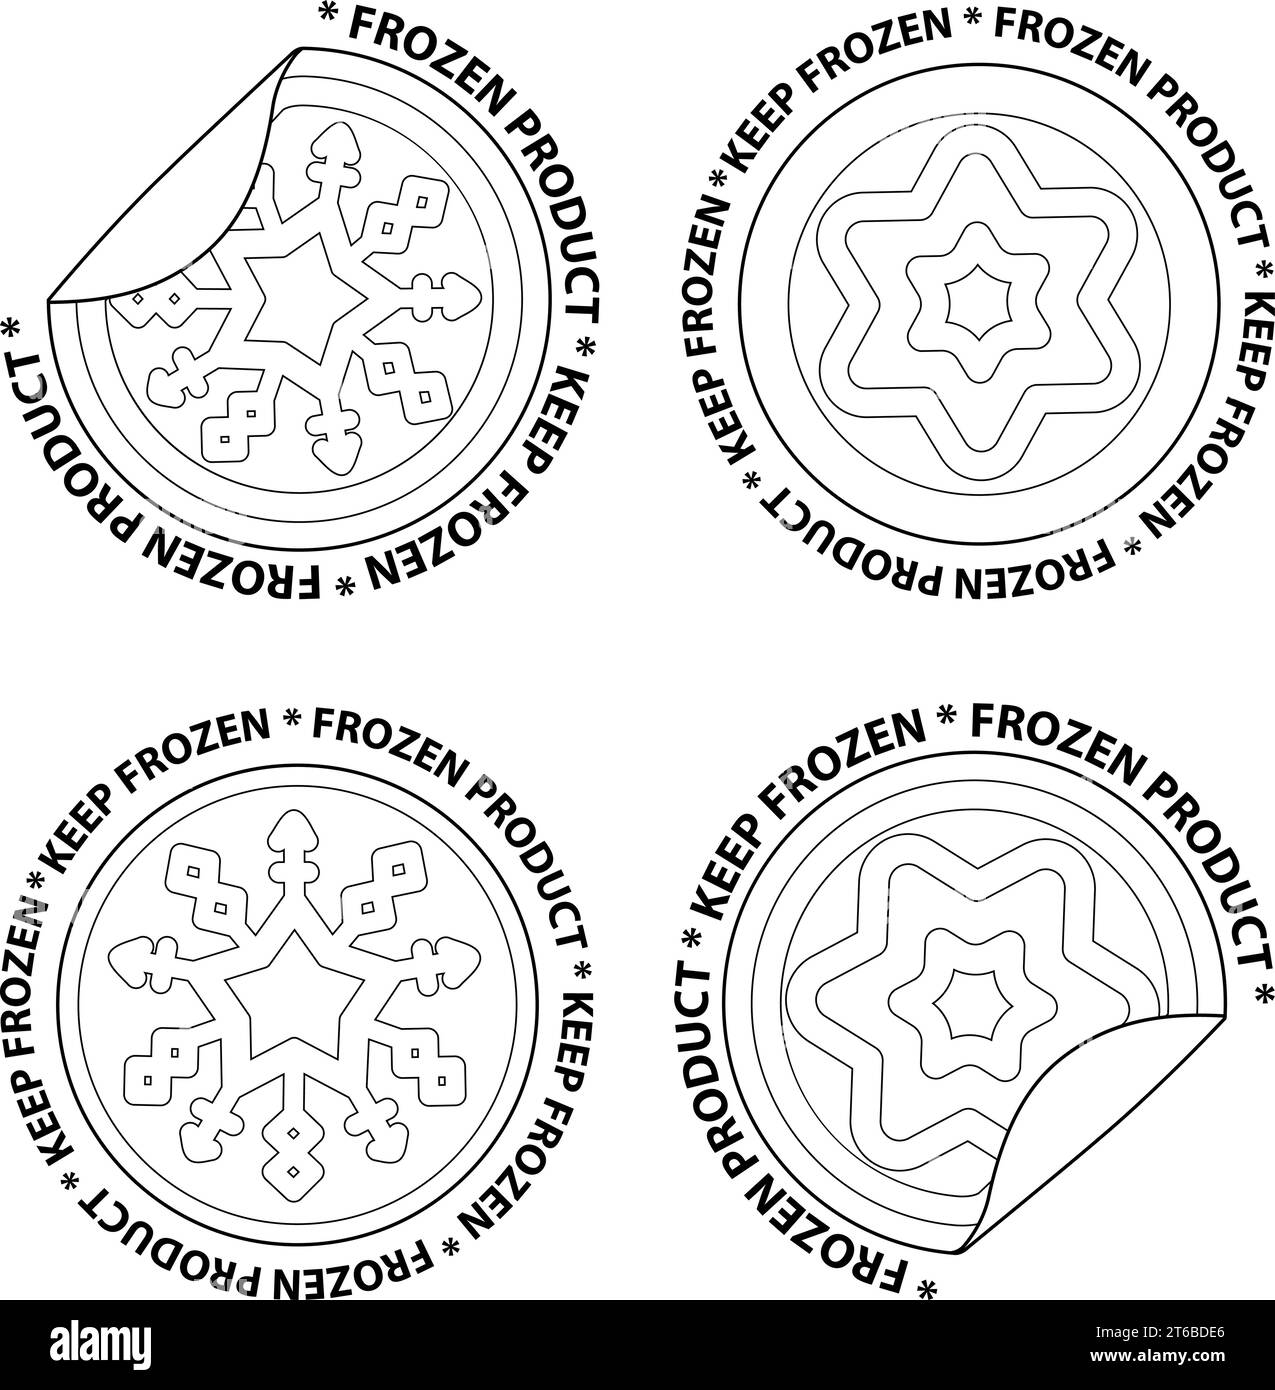 Keep frozen label icons. Frozen food signage. Vector black and white illustration. Stock Vector